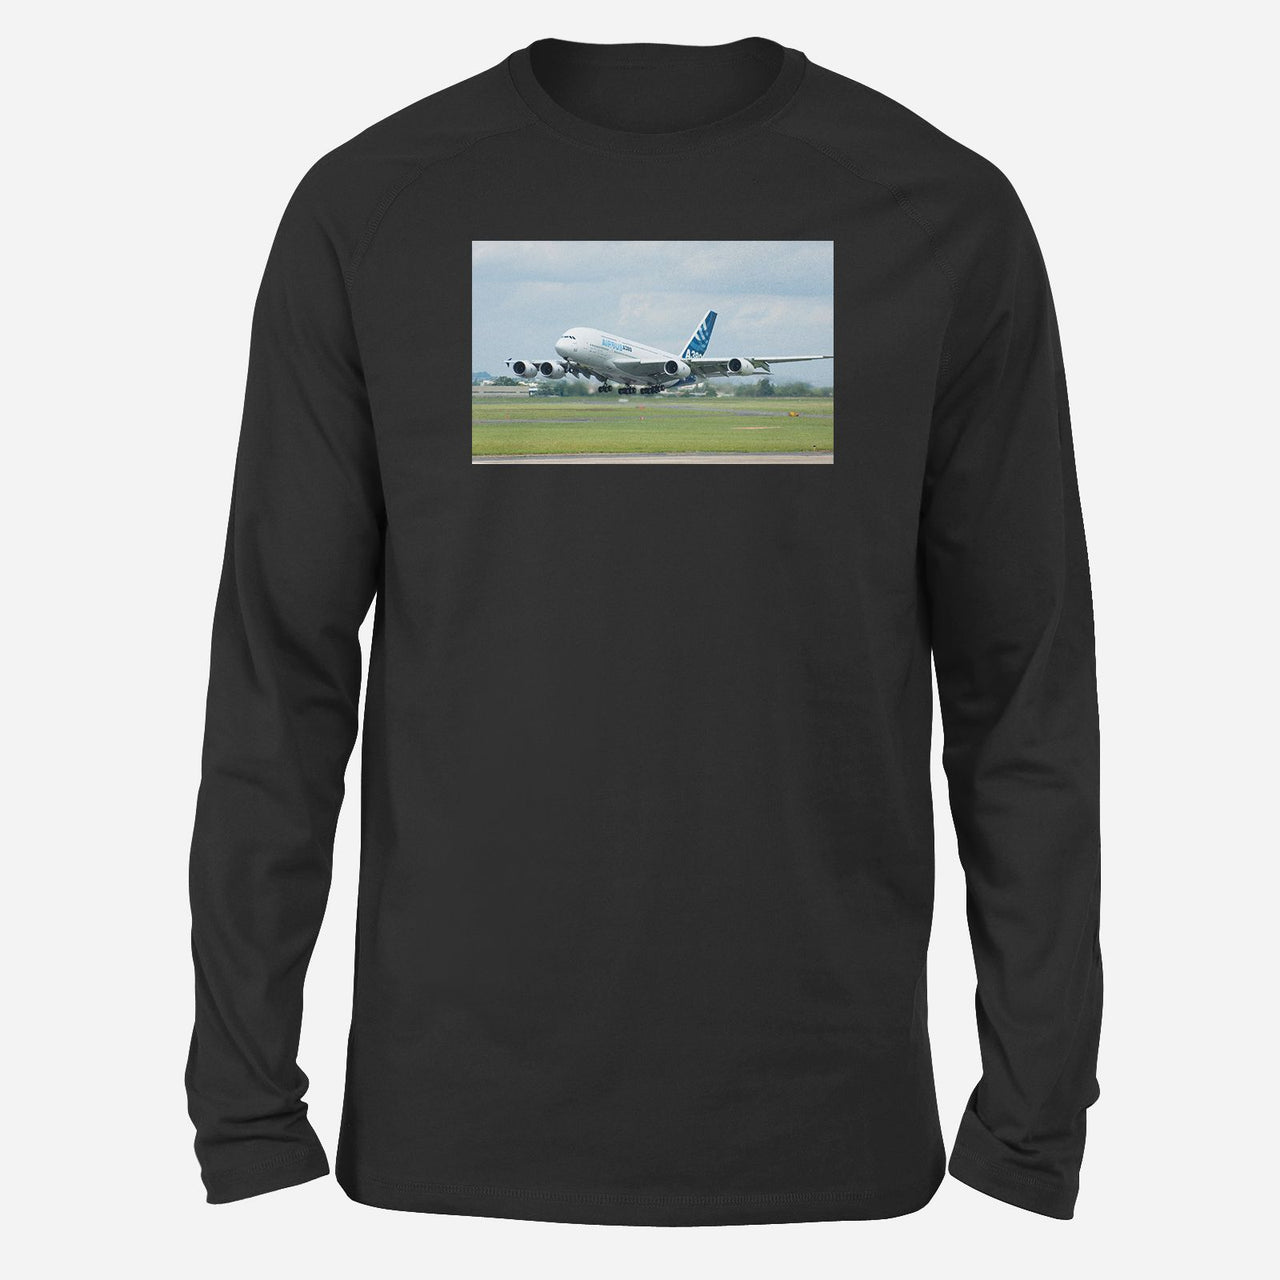 Departing Airbus A380 with Original Livery Designed Long-Sleeve T-Shirts